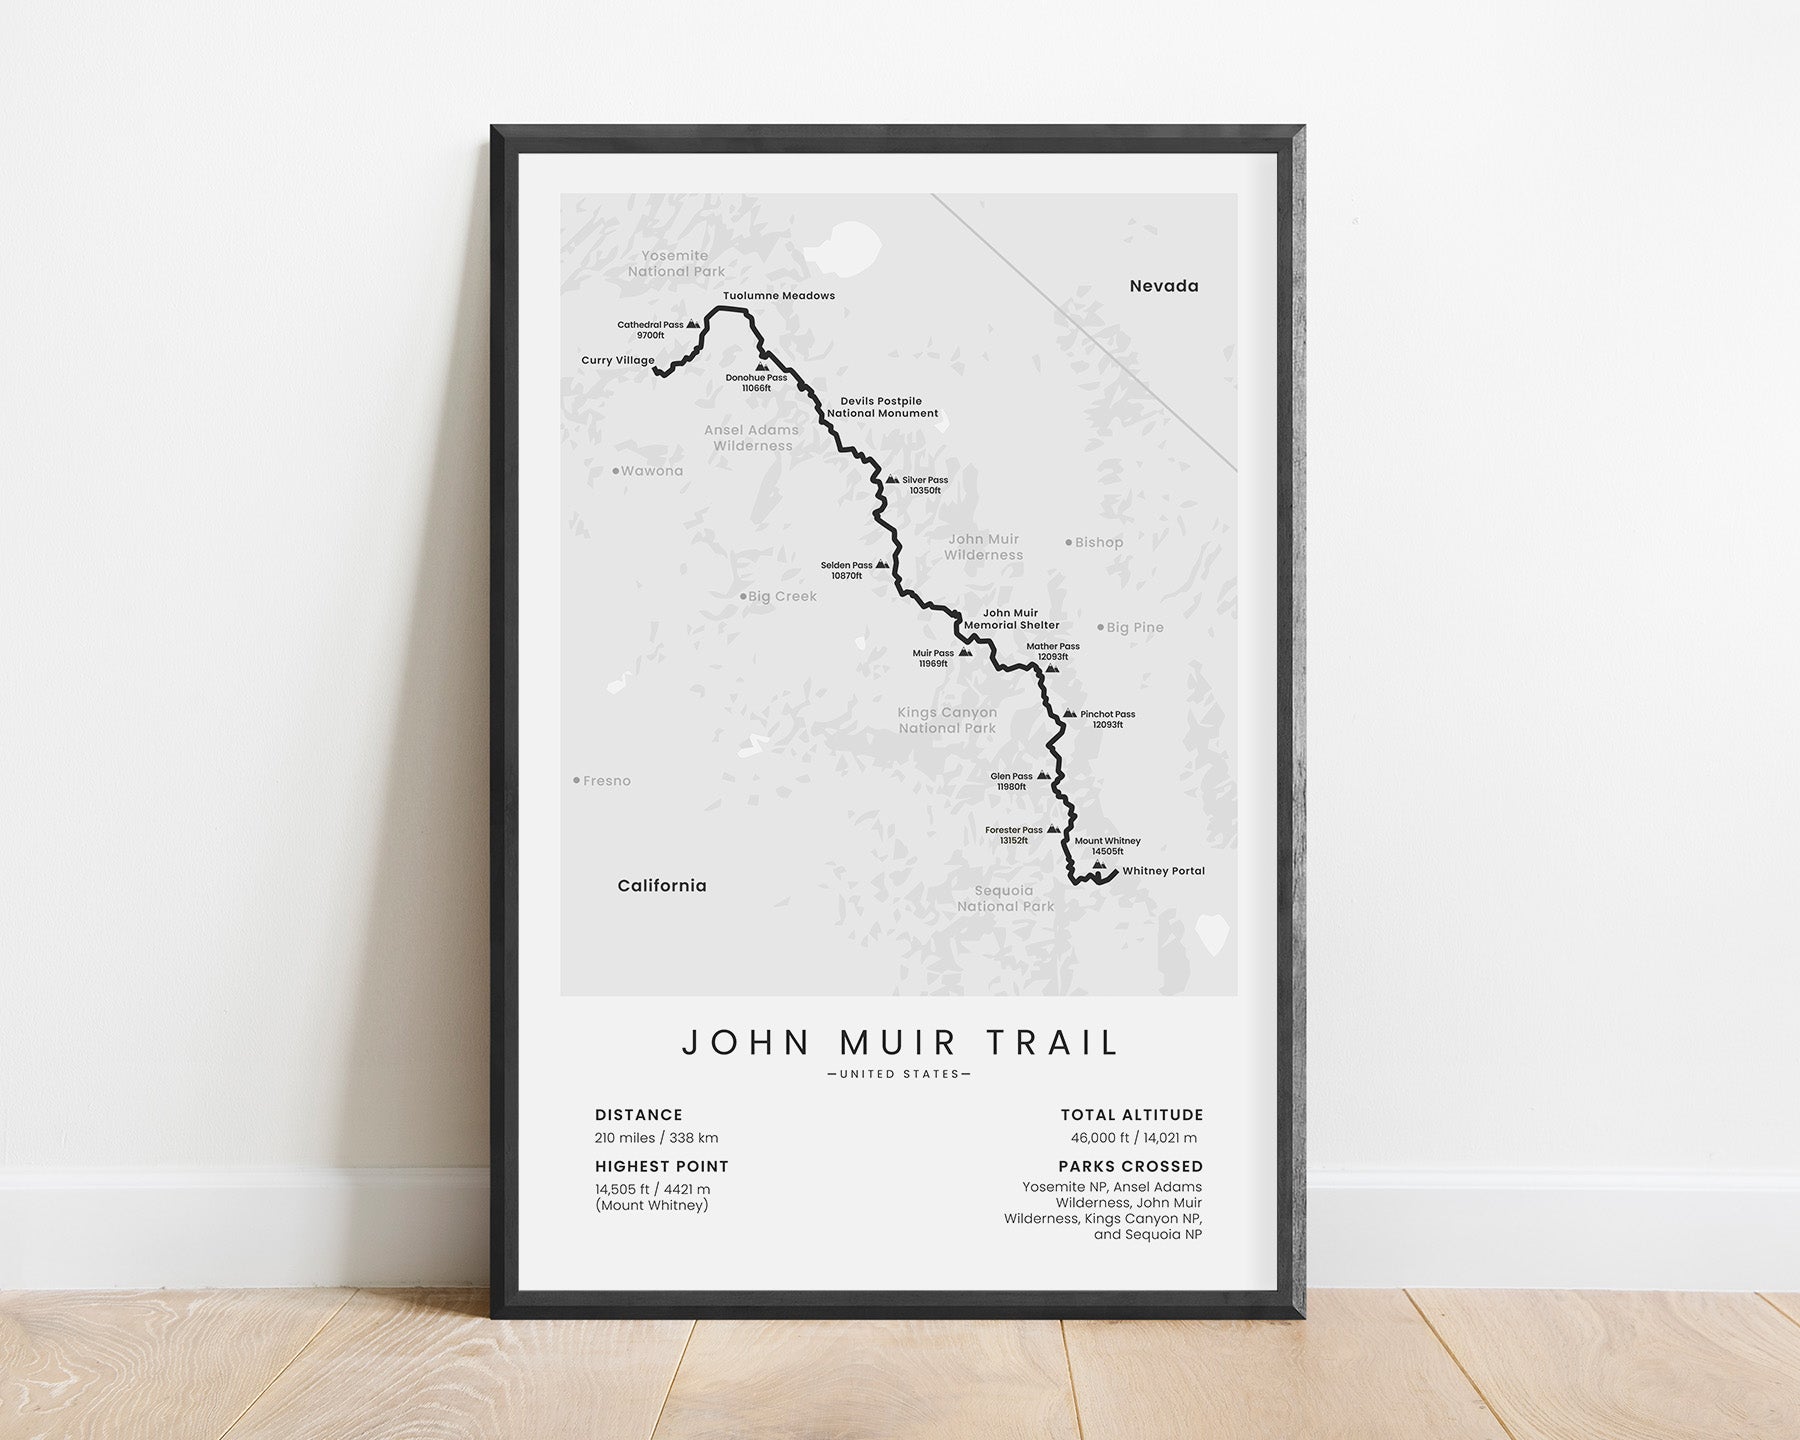 John Muir trail (in California, United States) thu-hike map with white background